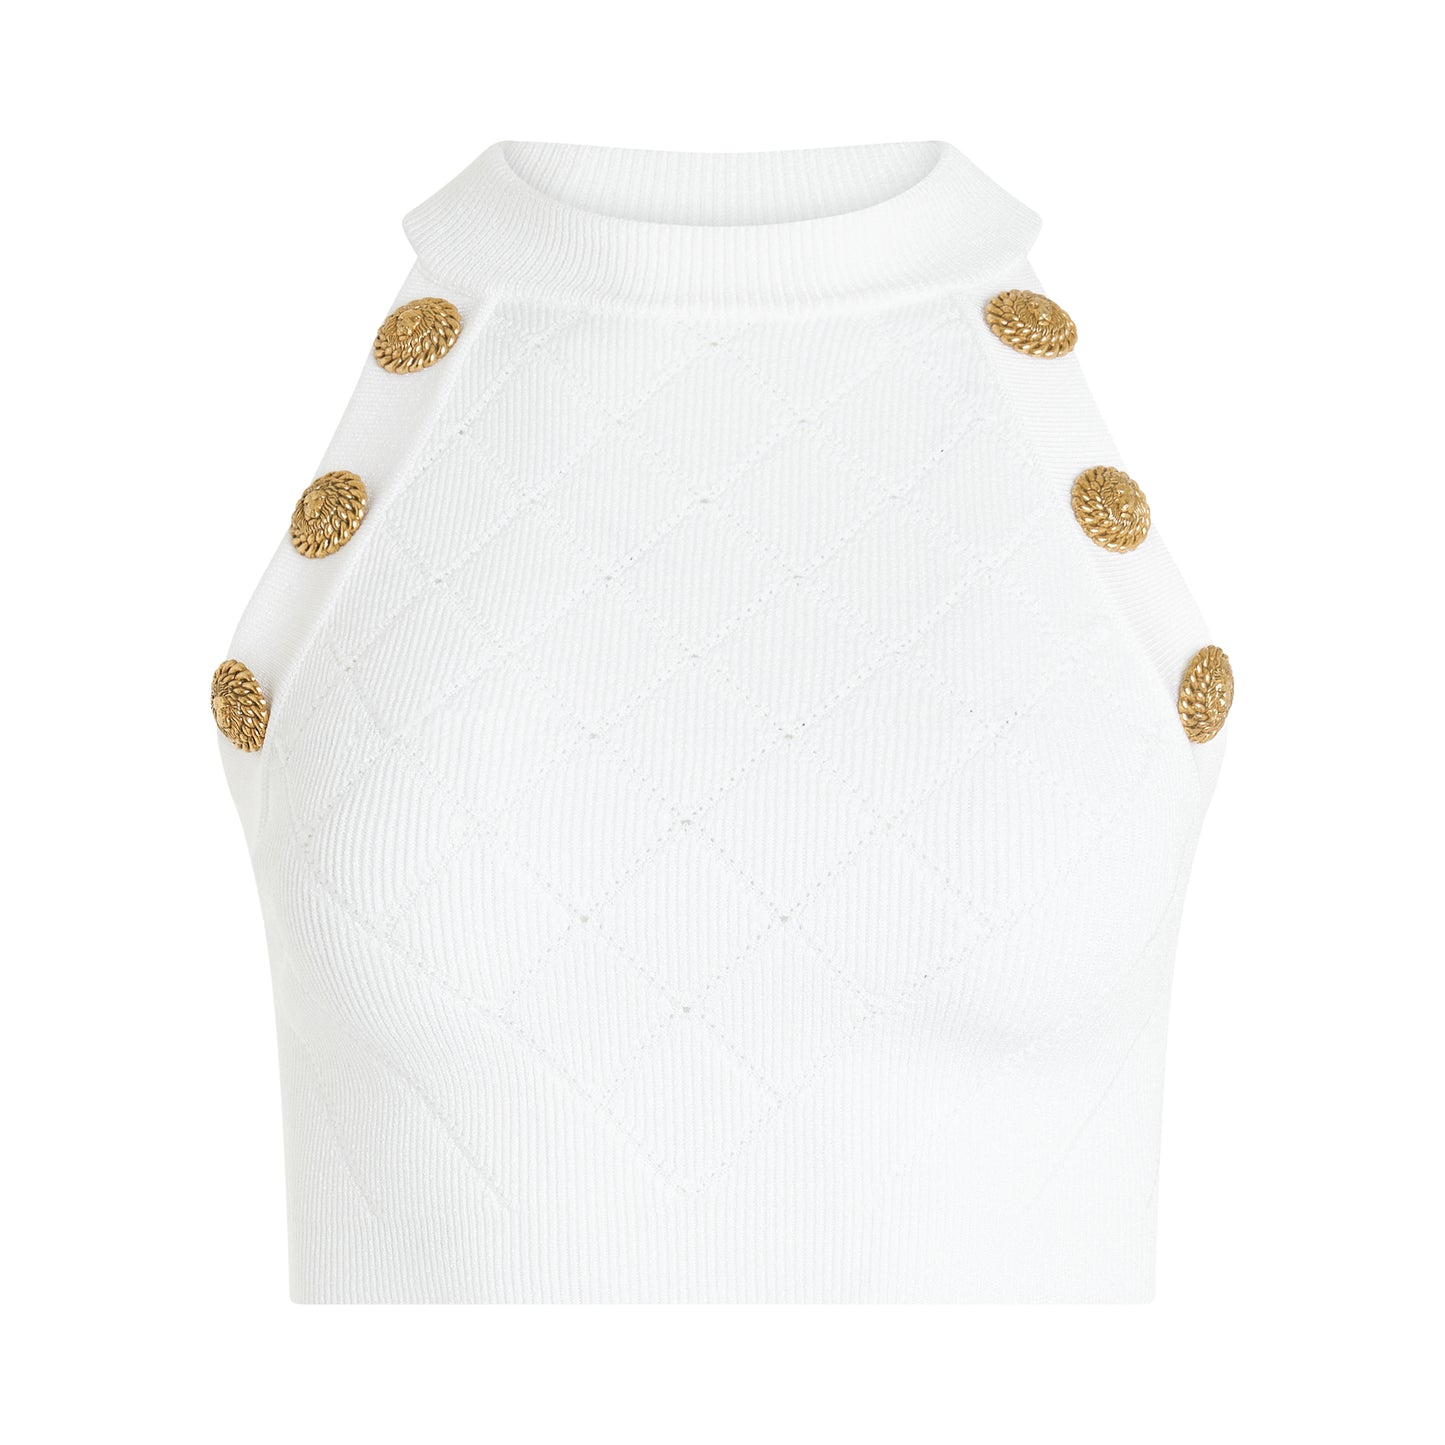 Short-sleeve 6 Button Knit Cropped Top in White